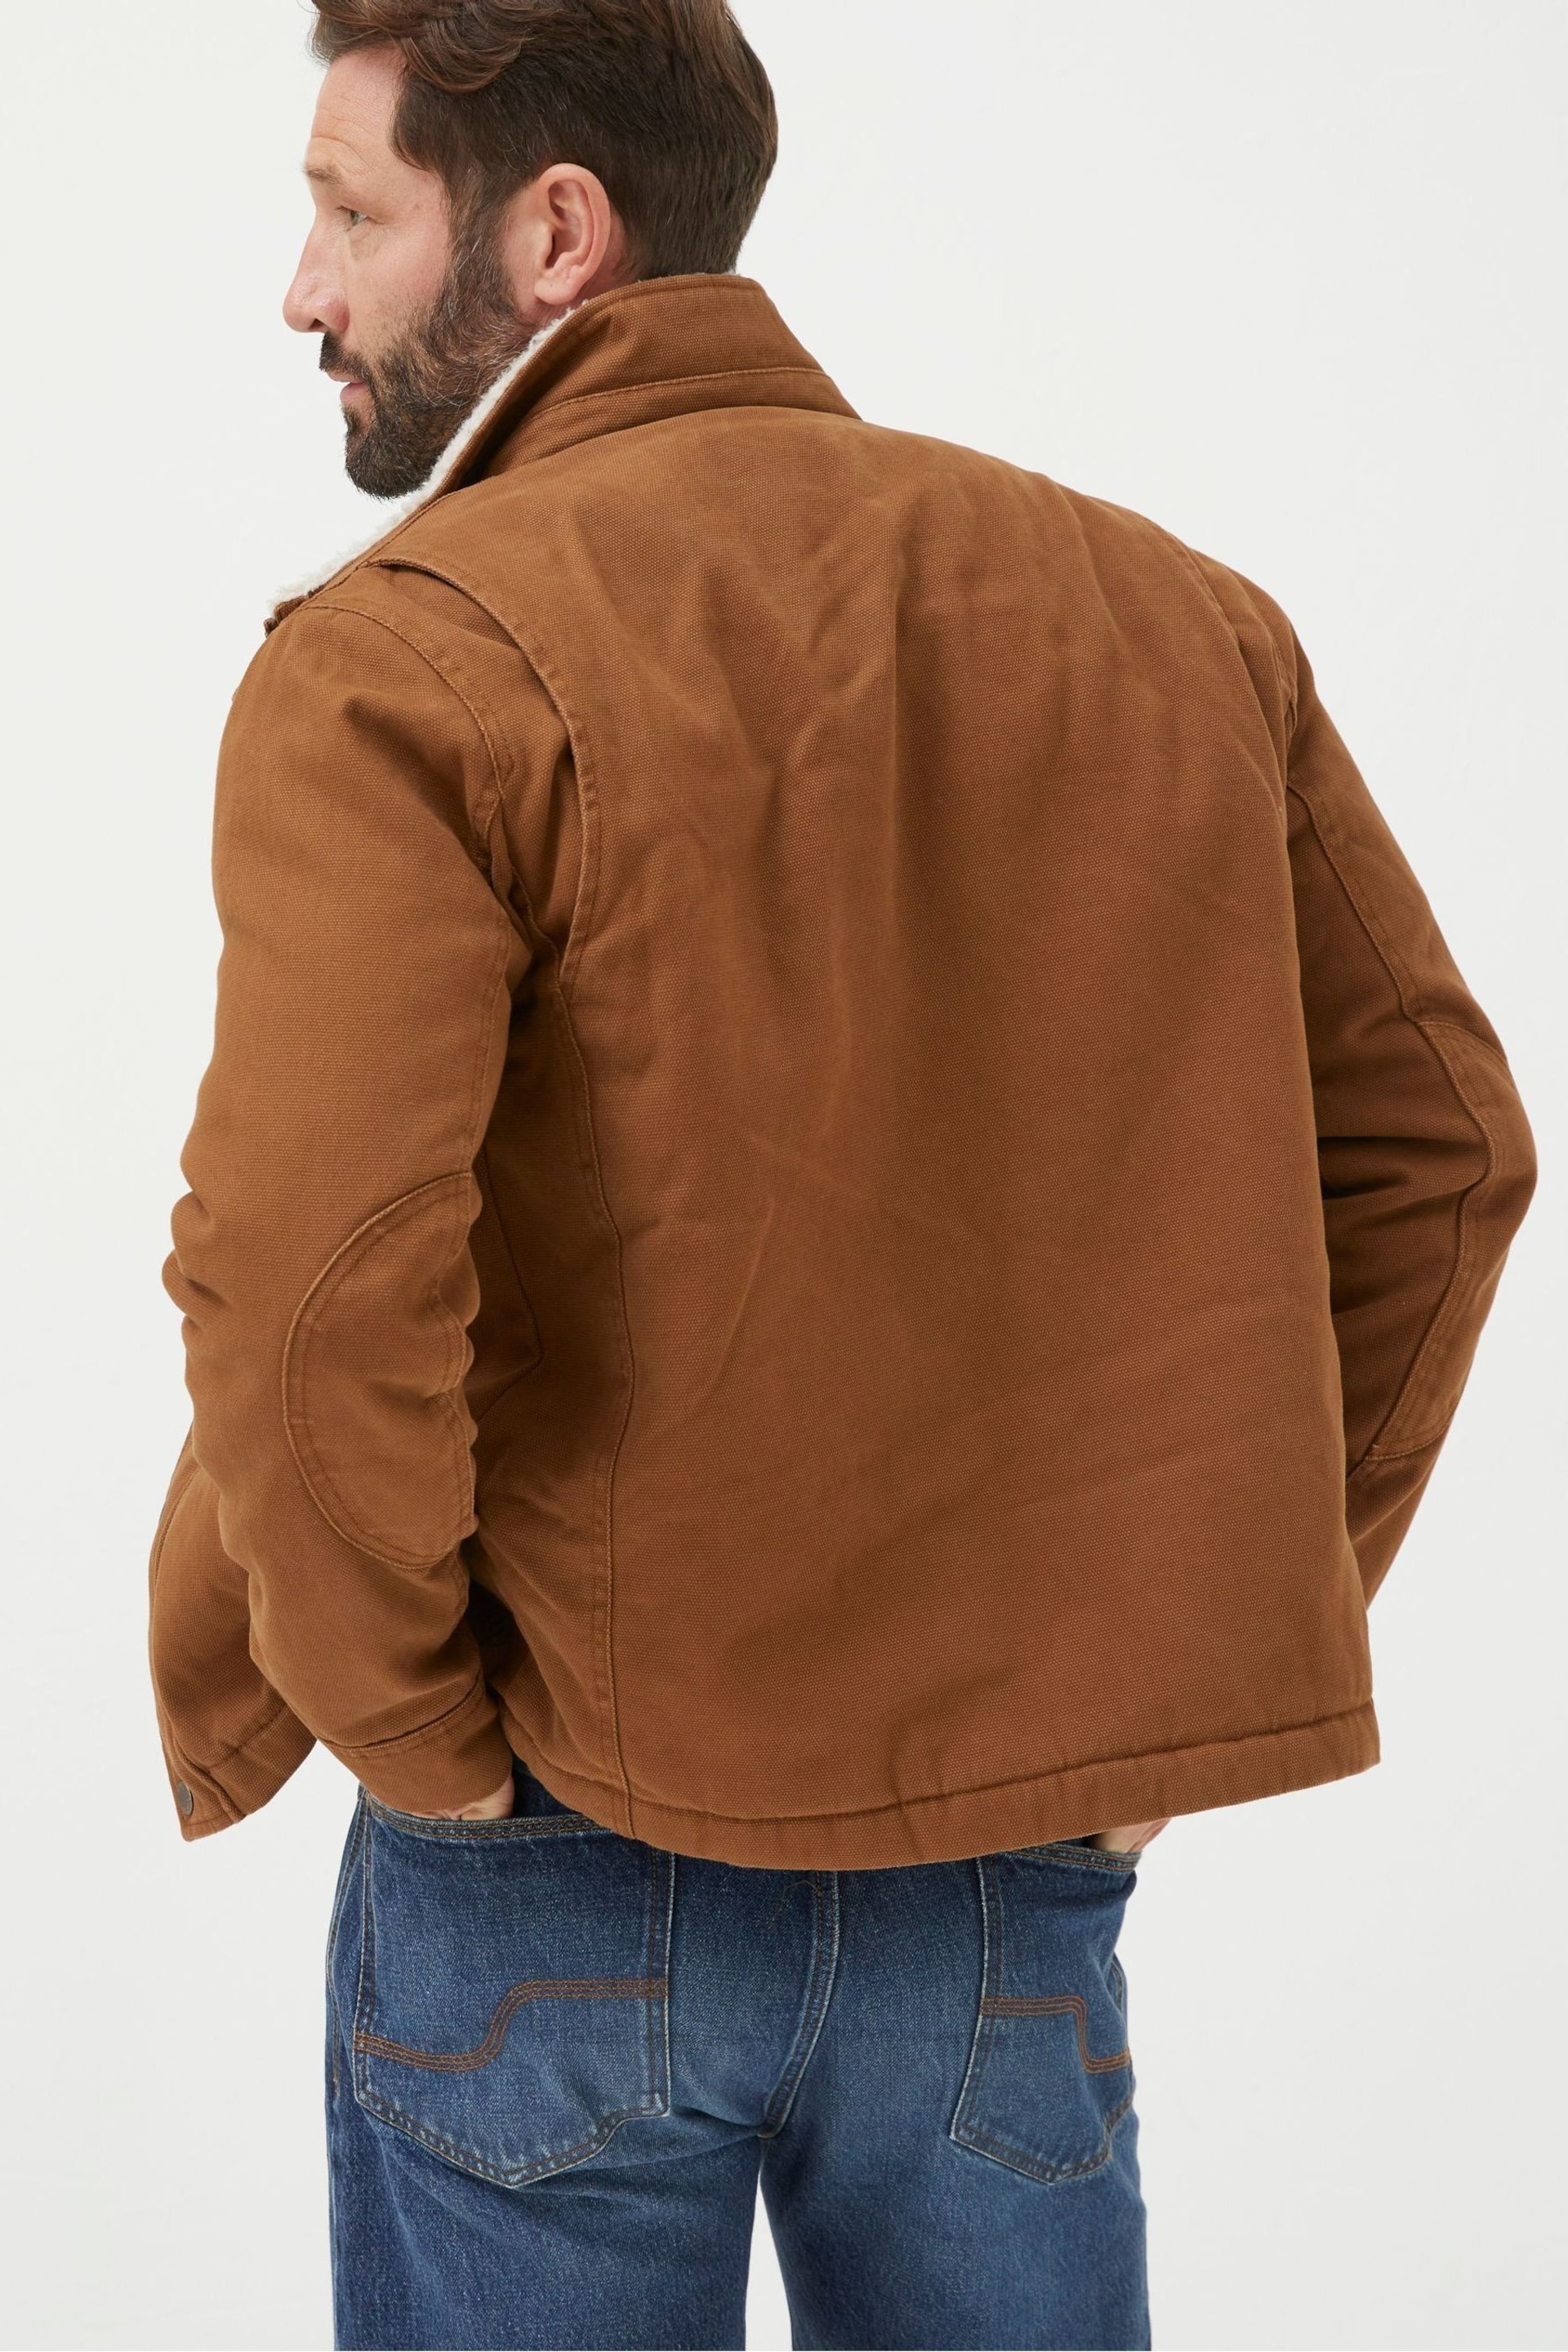 FatFace Brown Wardly Canvas Jacket - Image 4 of 7